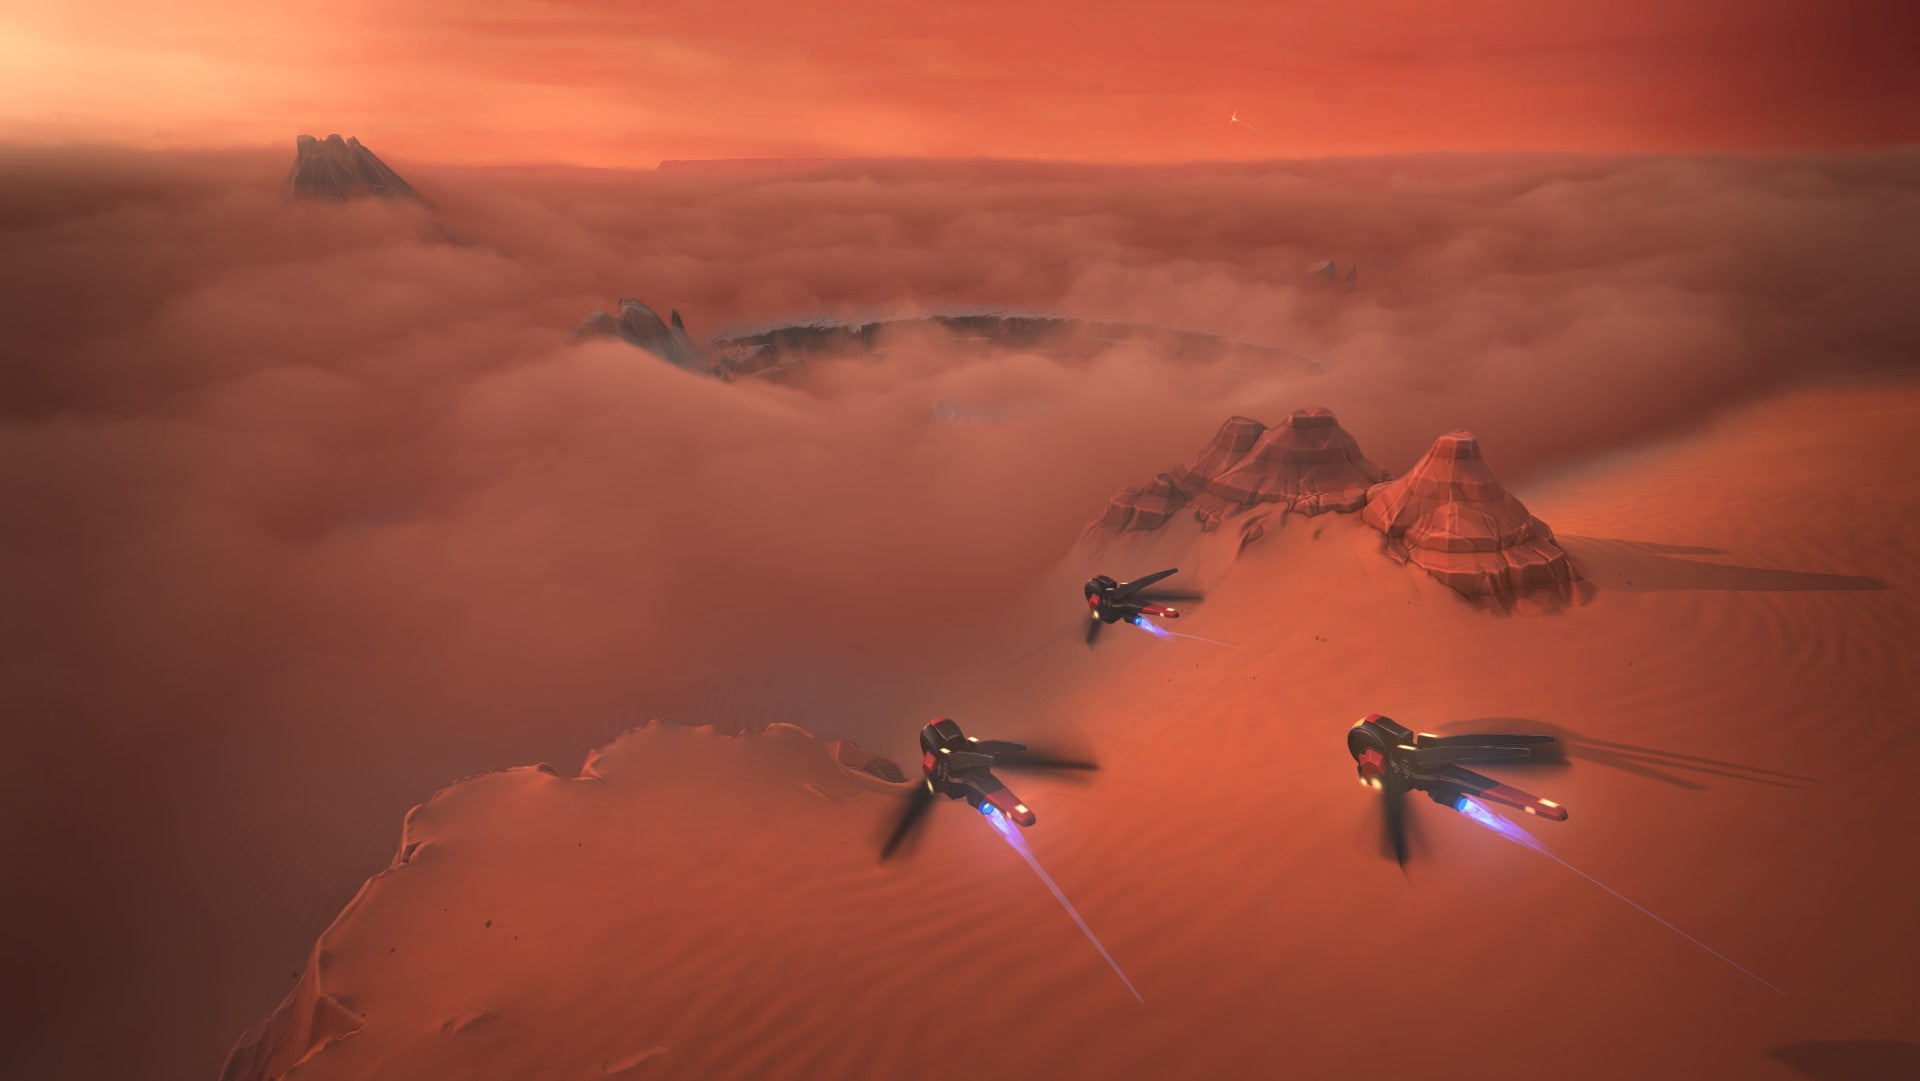 A group of ornithopters fly over the dunes in Dune: Spice Wars